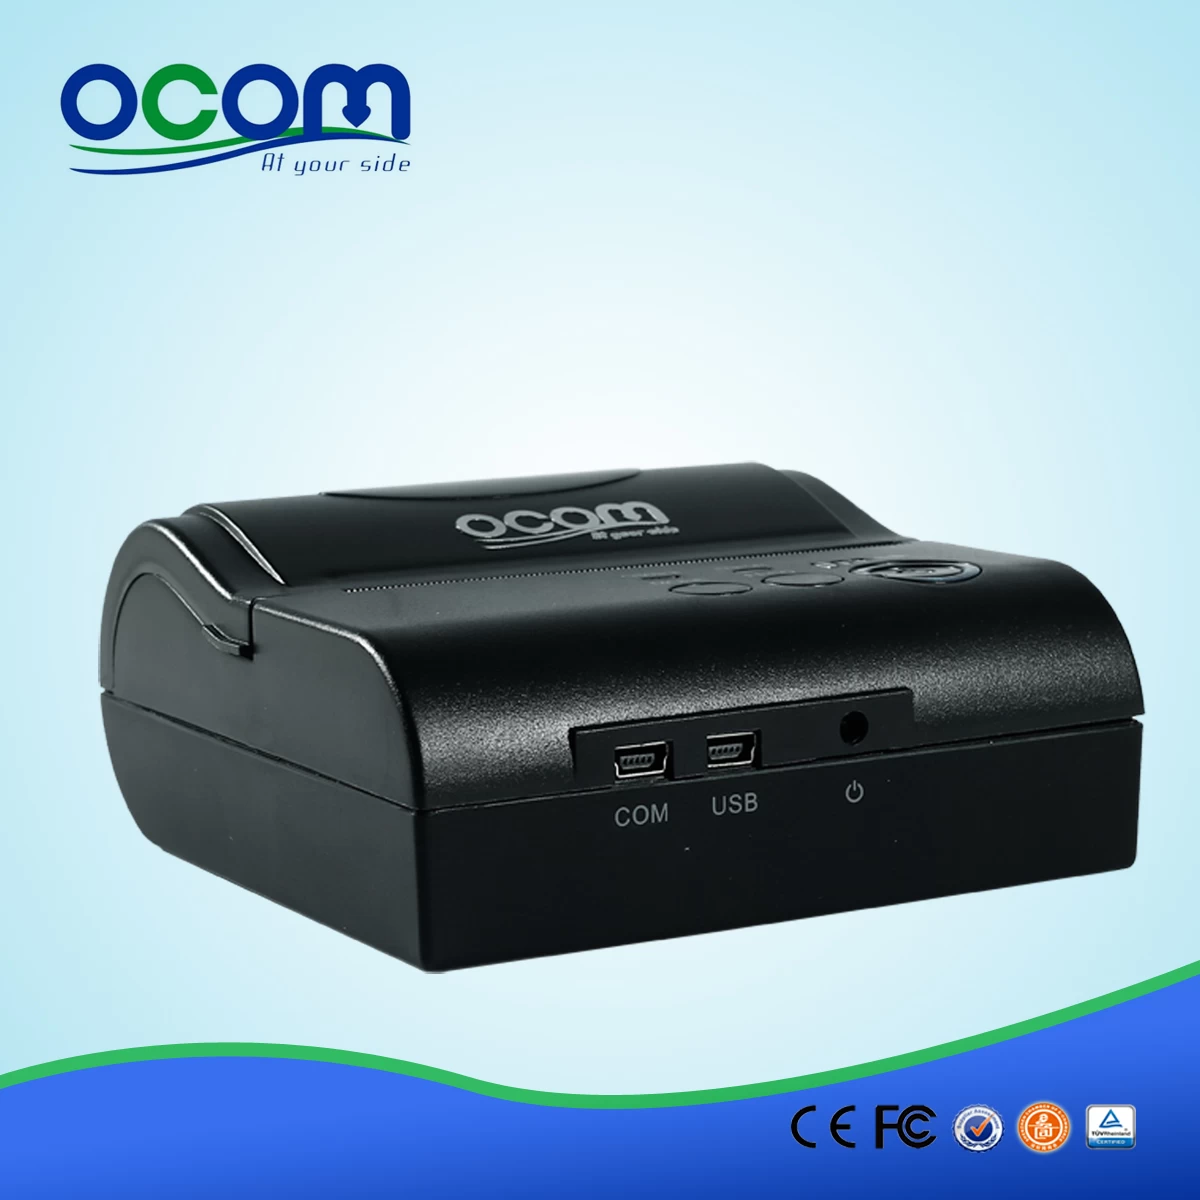 Chargeable Battery Powered Portable Android Thermal Bluetooth USB Printer